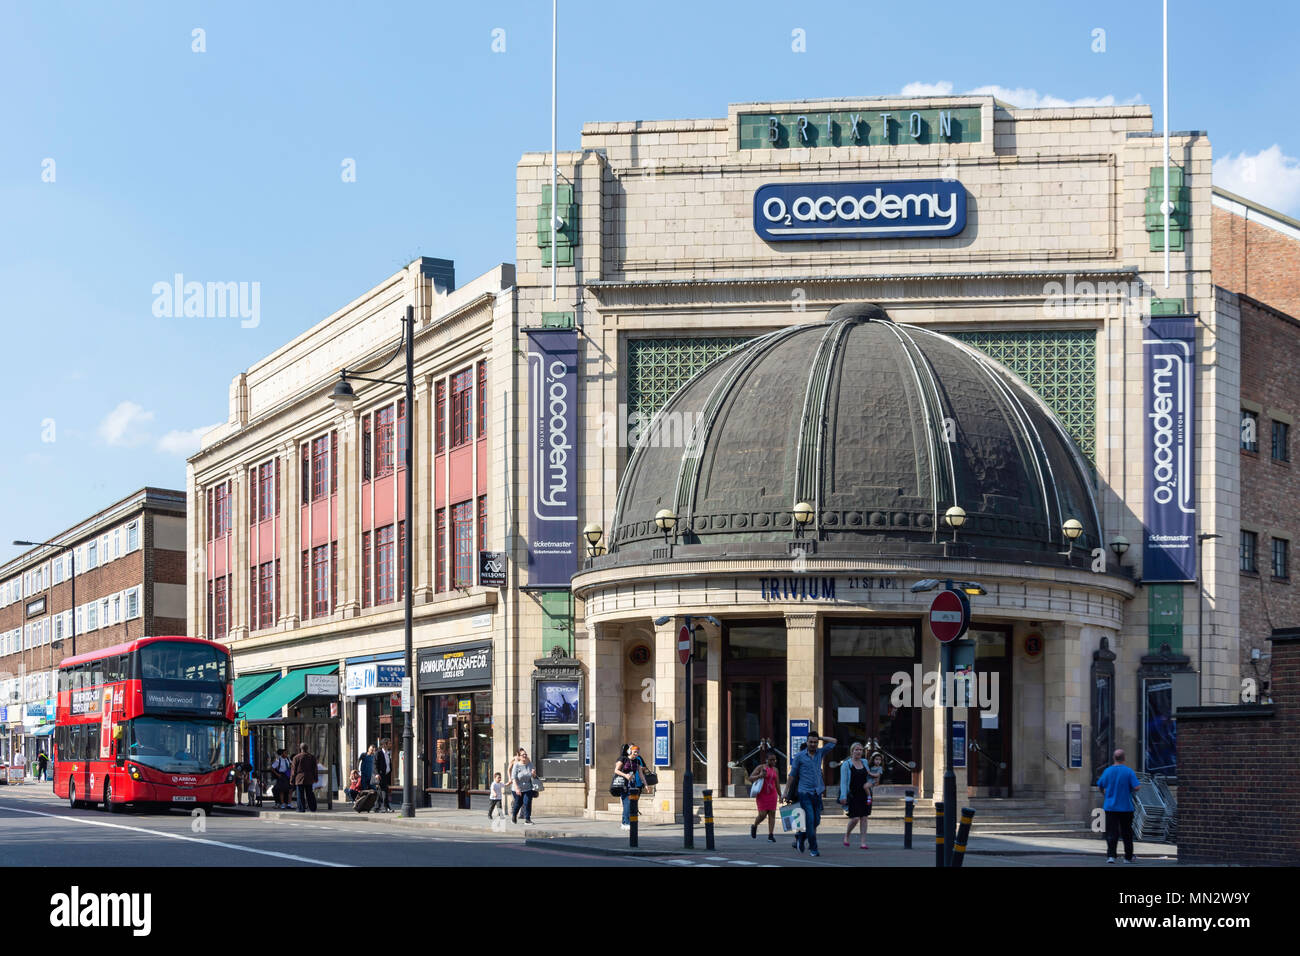 O2 Academy Brixton, Stockwell Road, Brixton, London Borough of Lambeth, Greater London, Angleterre, Royaume-Uni Banque D'Images